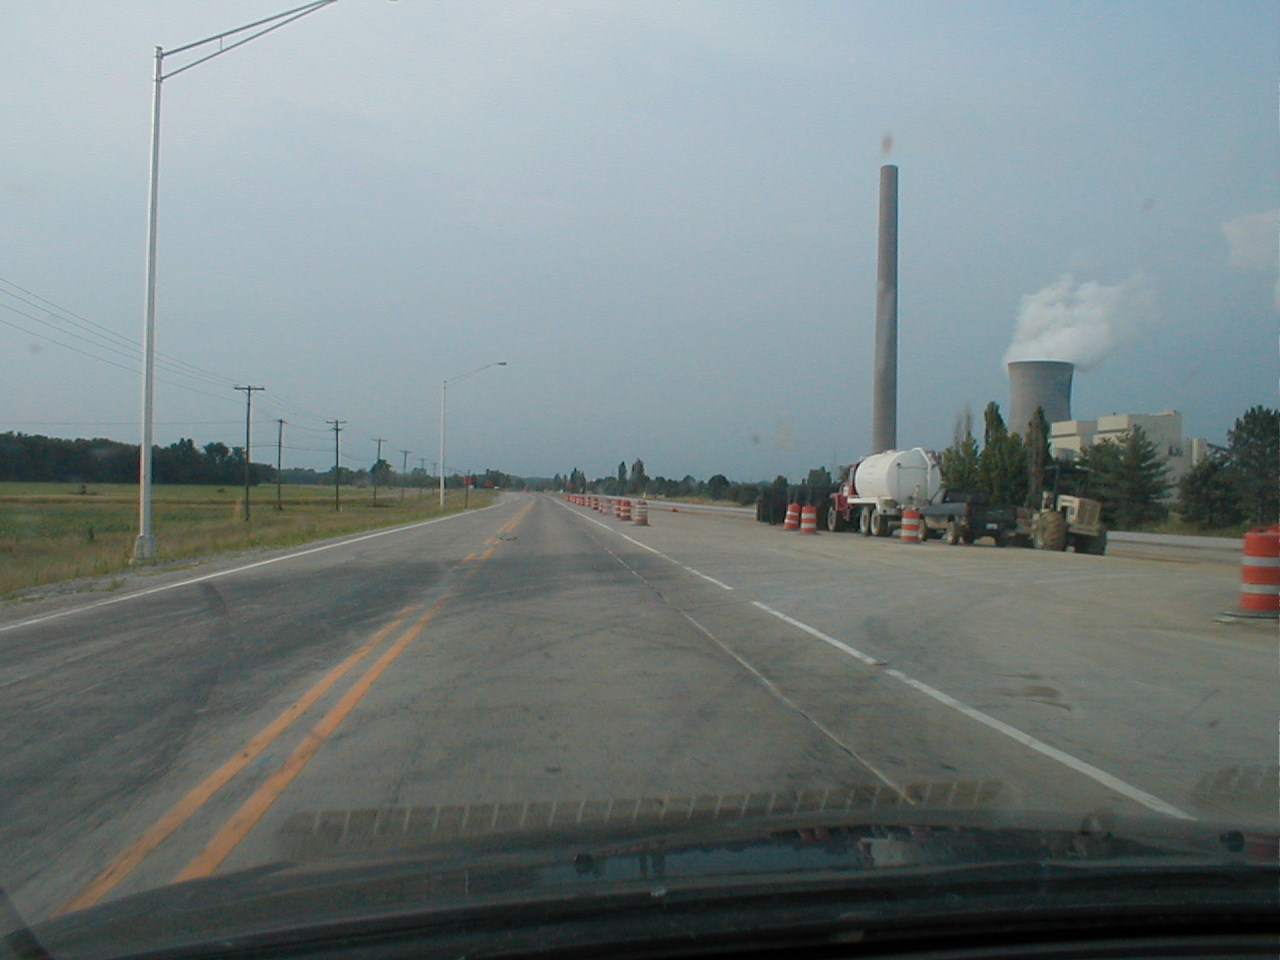 Construction on the Indiana approach.